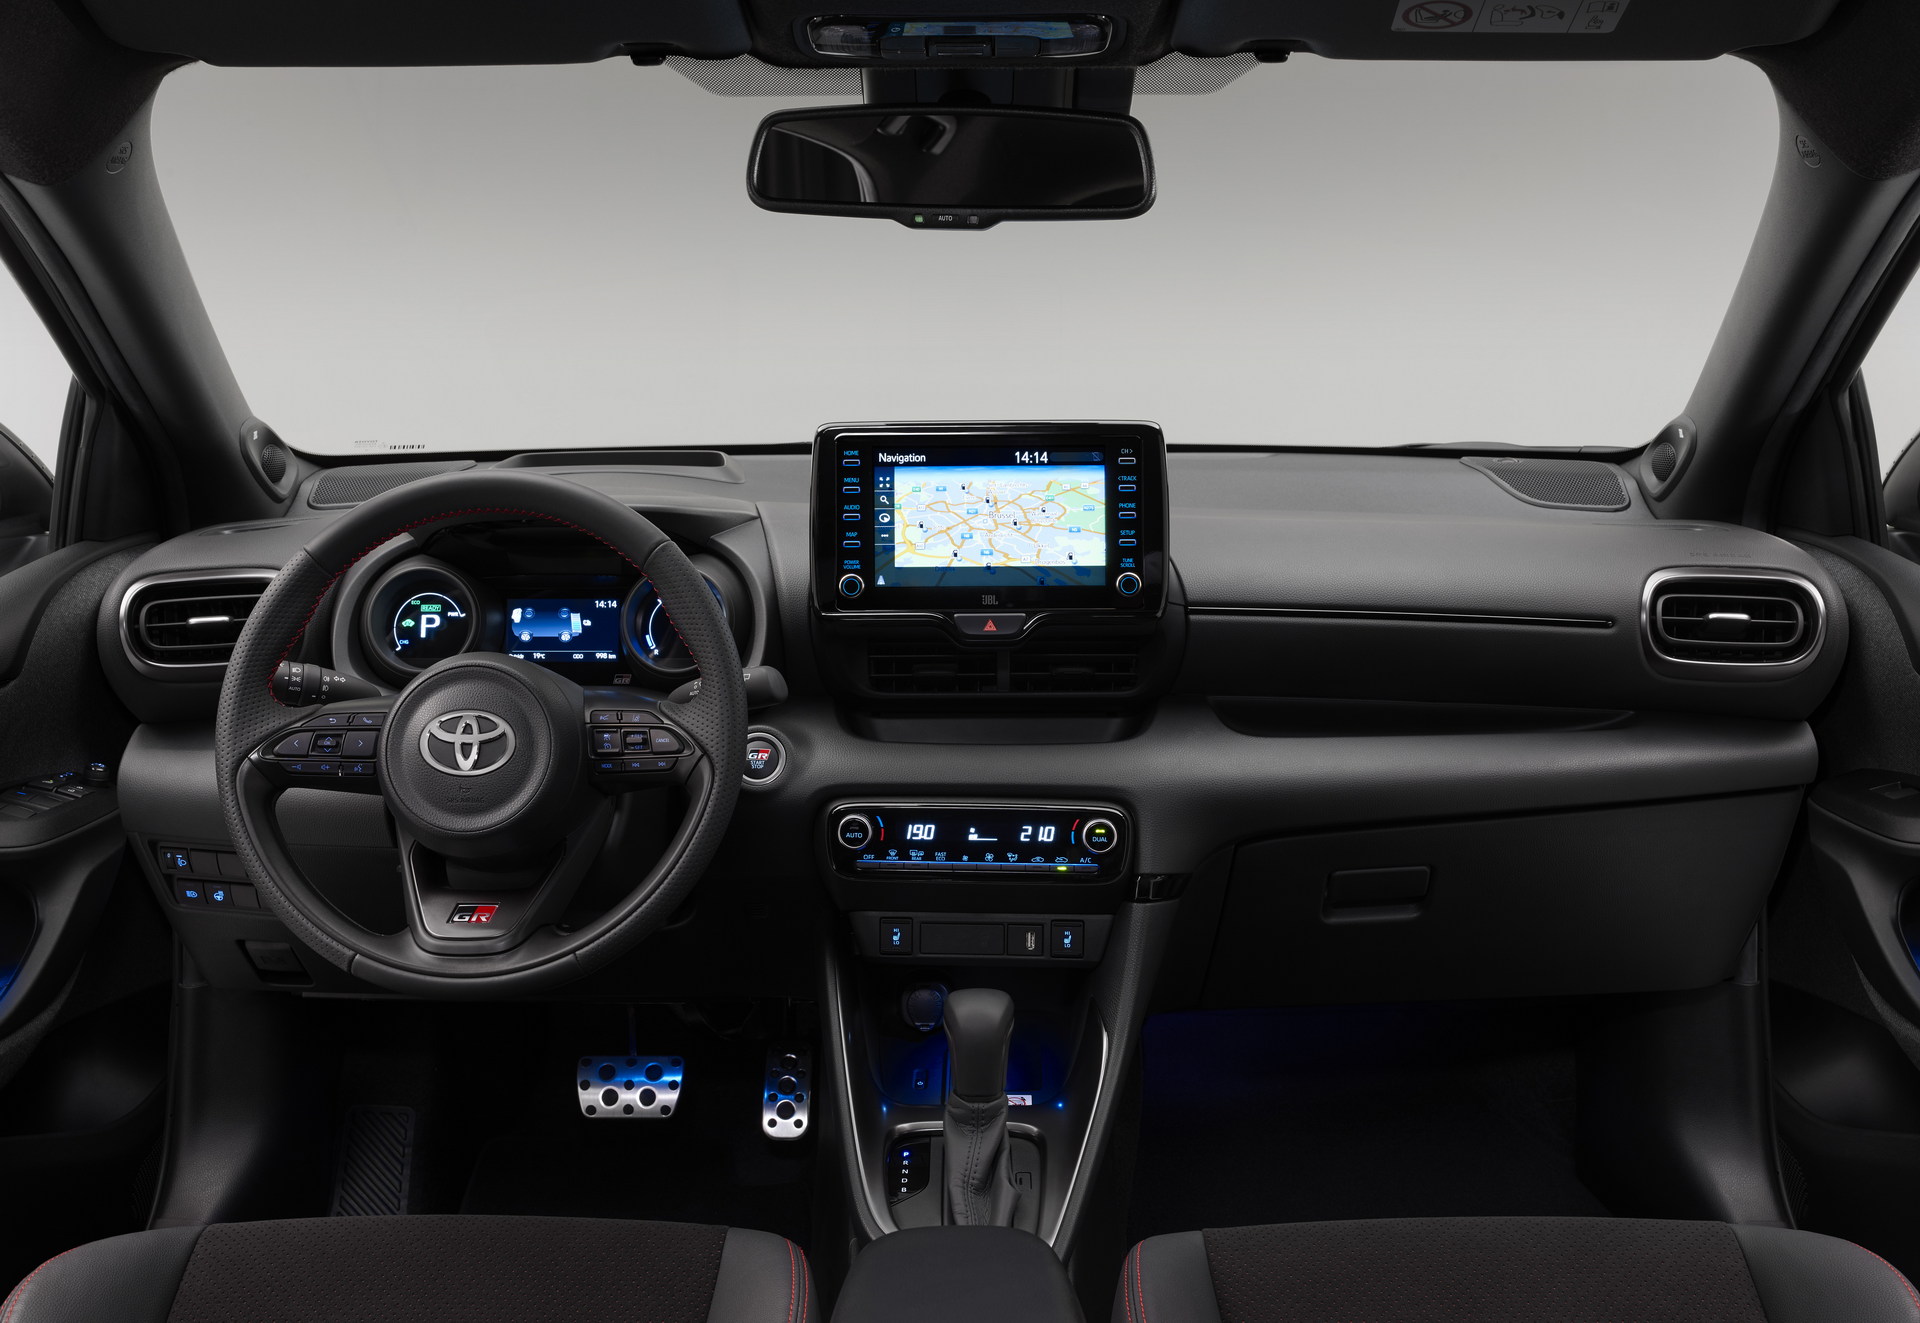 NEW Toyota Yaris GR Sport (2023) - Interior and Exterior Details 